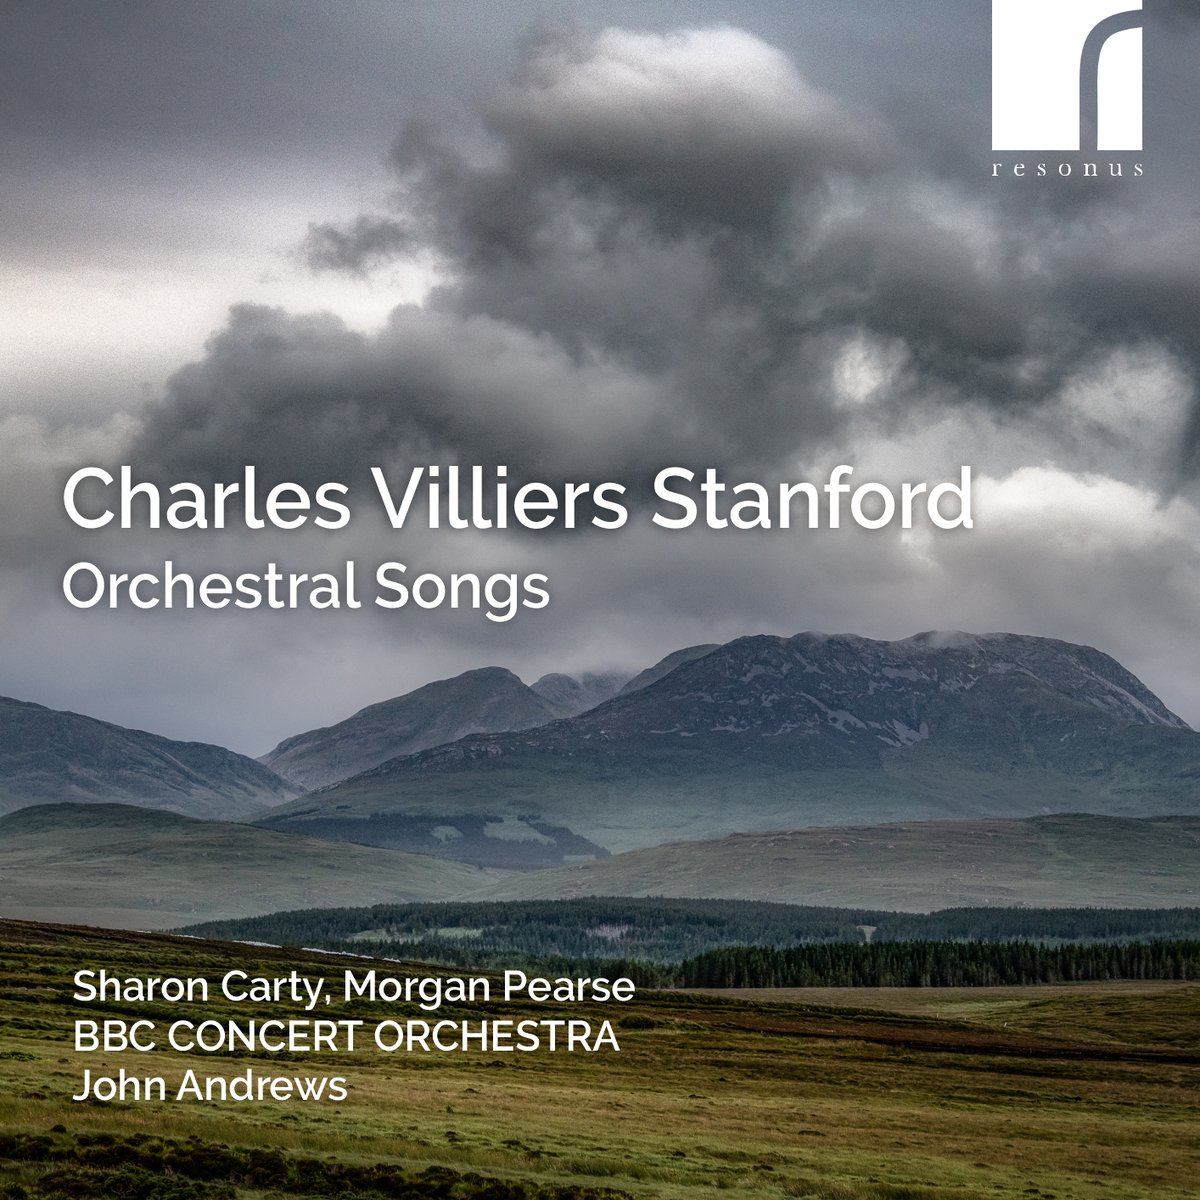 To whet your appetites, here's a track from the forthcoming album of Orchestral Songs by #charlesvilliersstanford in his anniversary year from @BBCCO @JKAConductor Sharon Carty and Morgan Pearse. Listen now on @Spotify or wherever you get your music 👉orcd.co/yxvvzm1